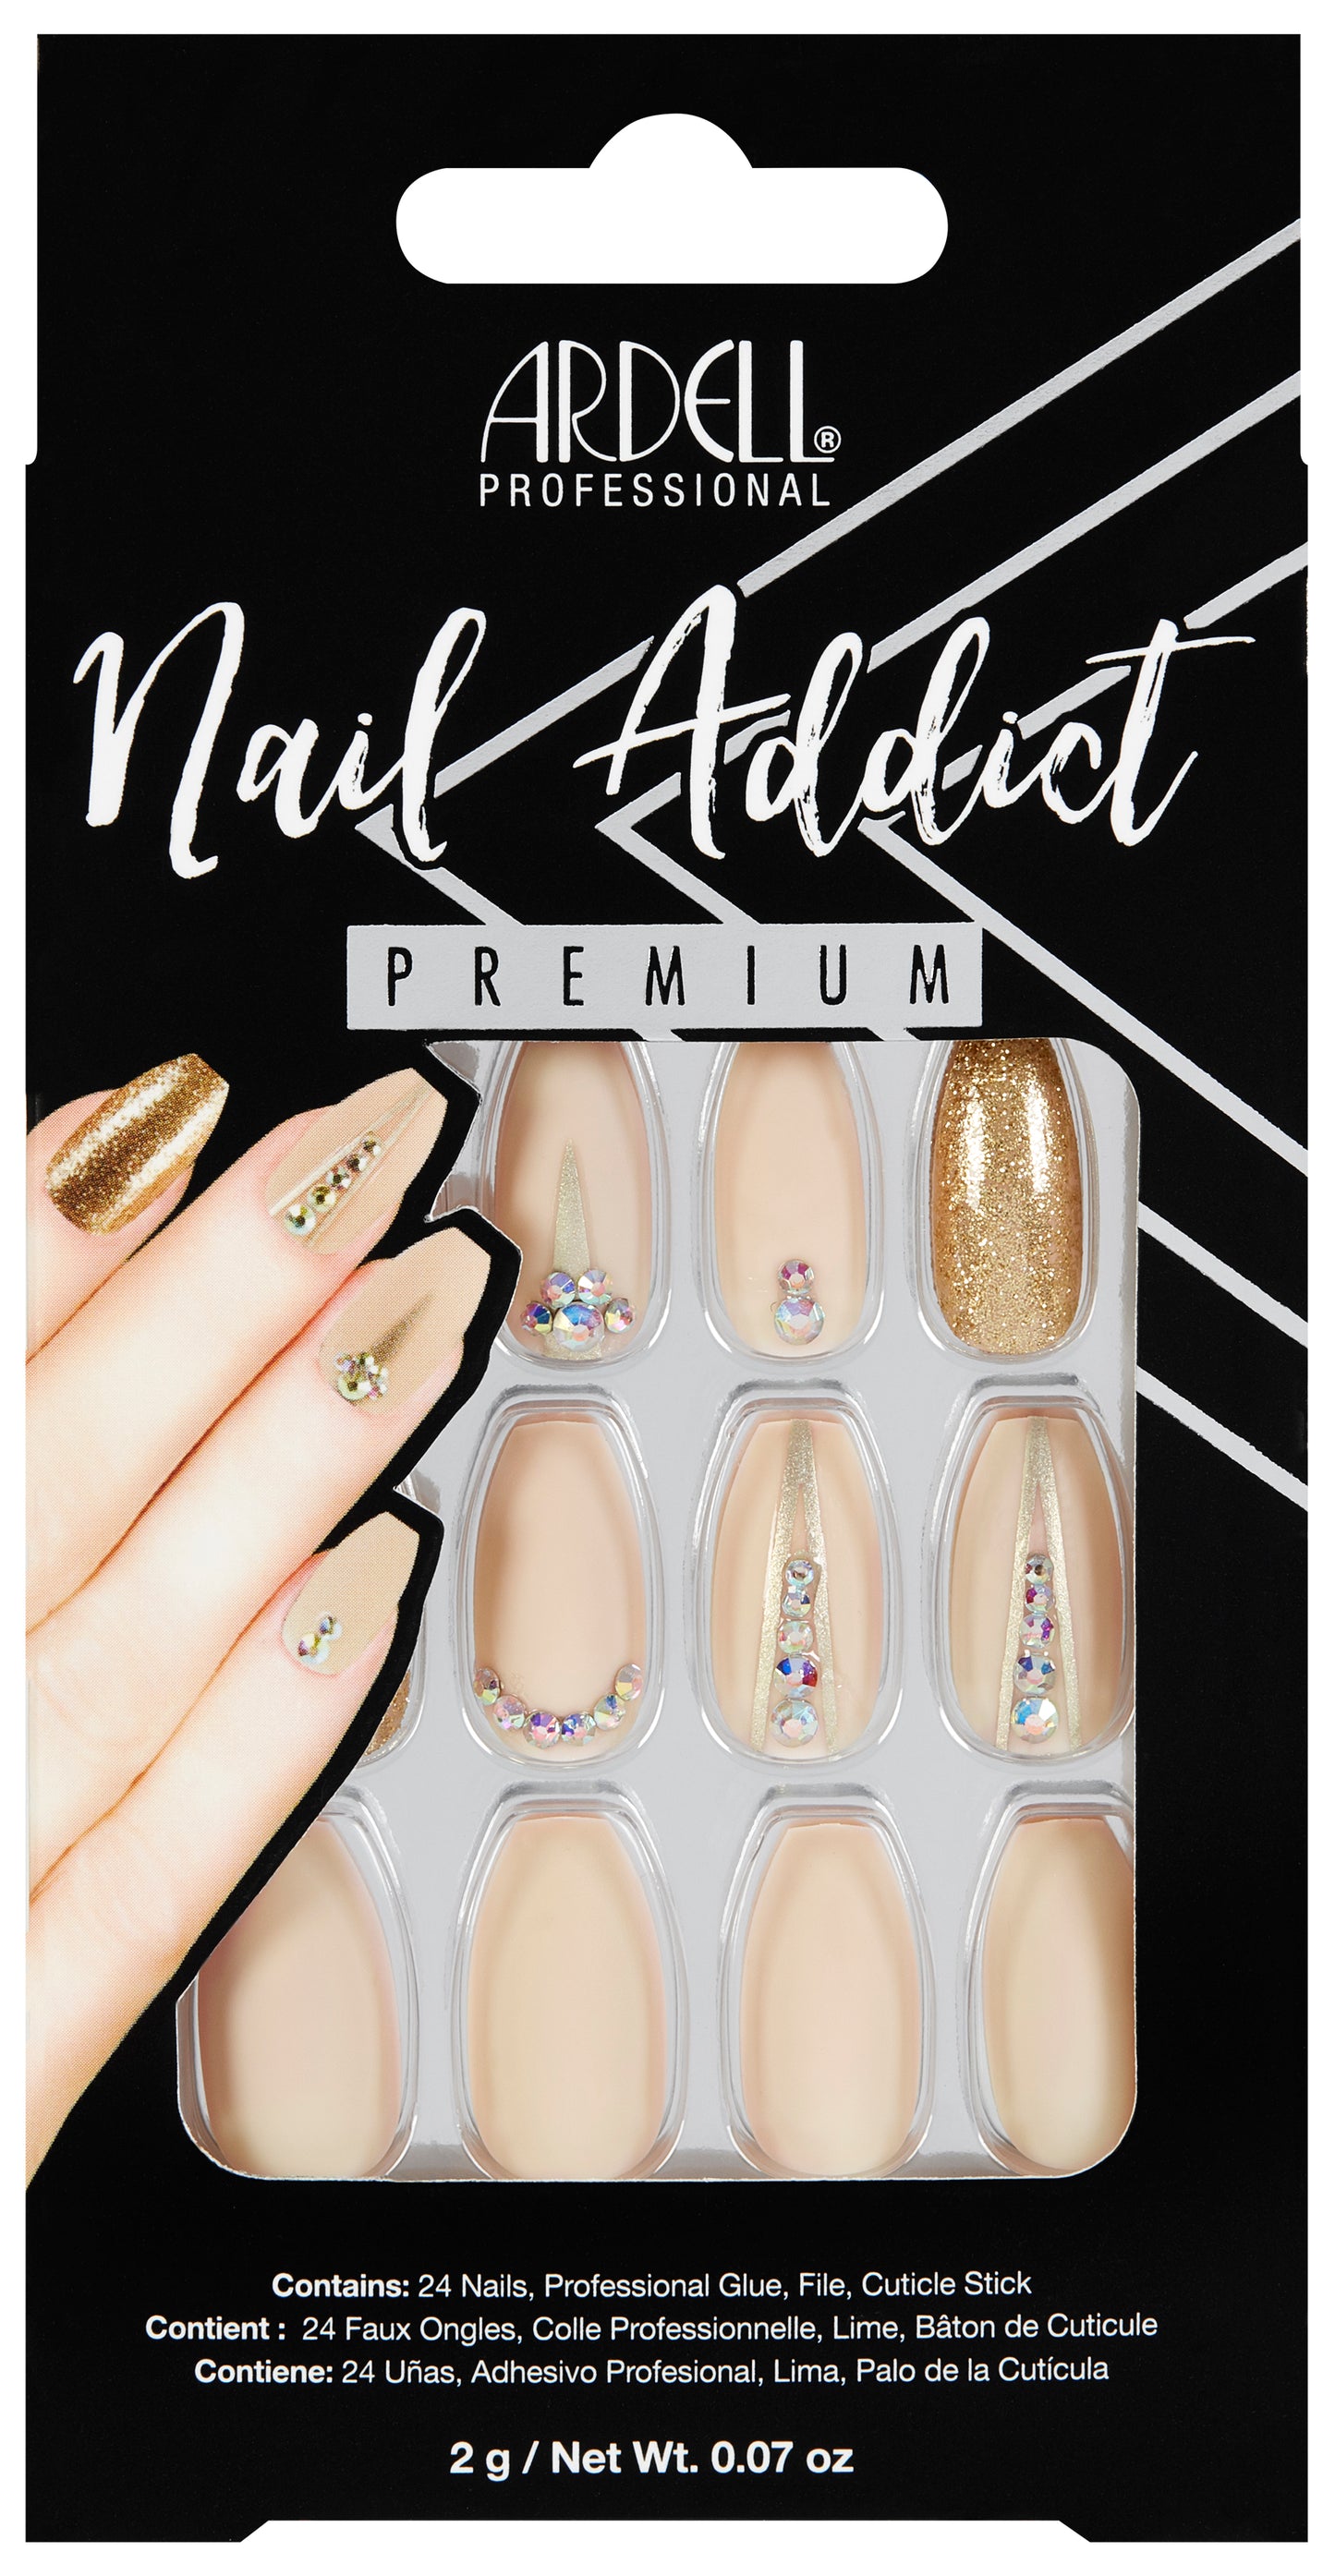 Ardell Nail Addict Premium Nails Nude Jewelled